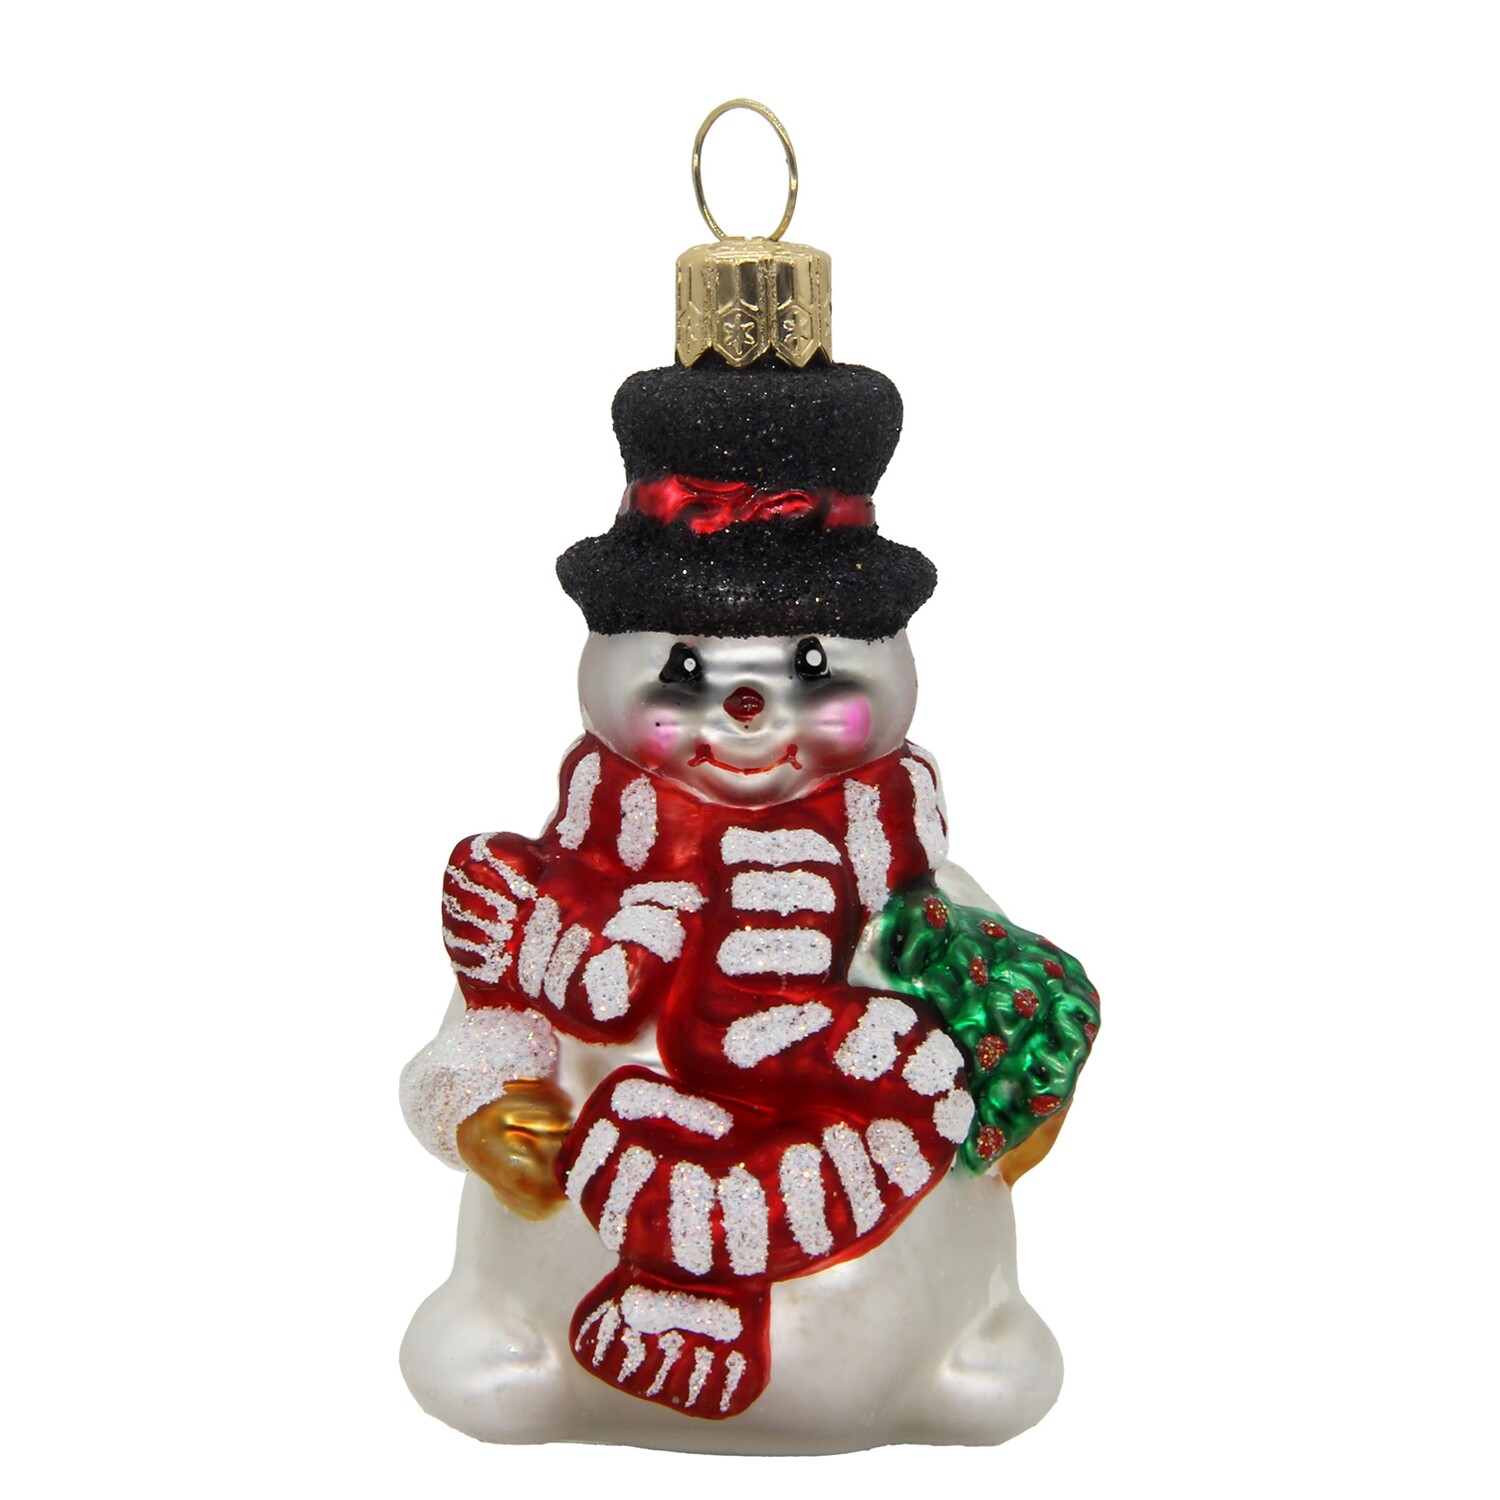 CDL Snowman Glass Christmas Tree Ornament - Adorable Snowman Christmas Tree Ornament with Red Scarf and Hat G25